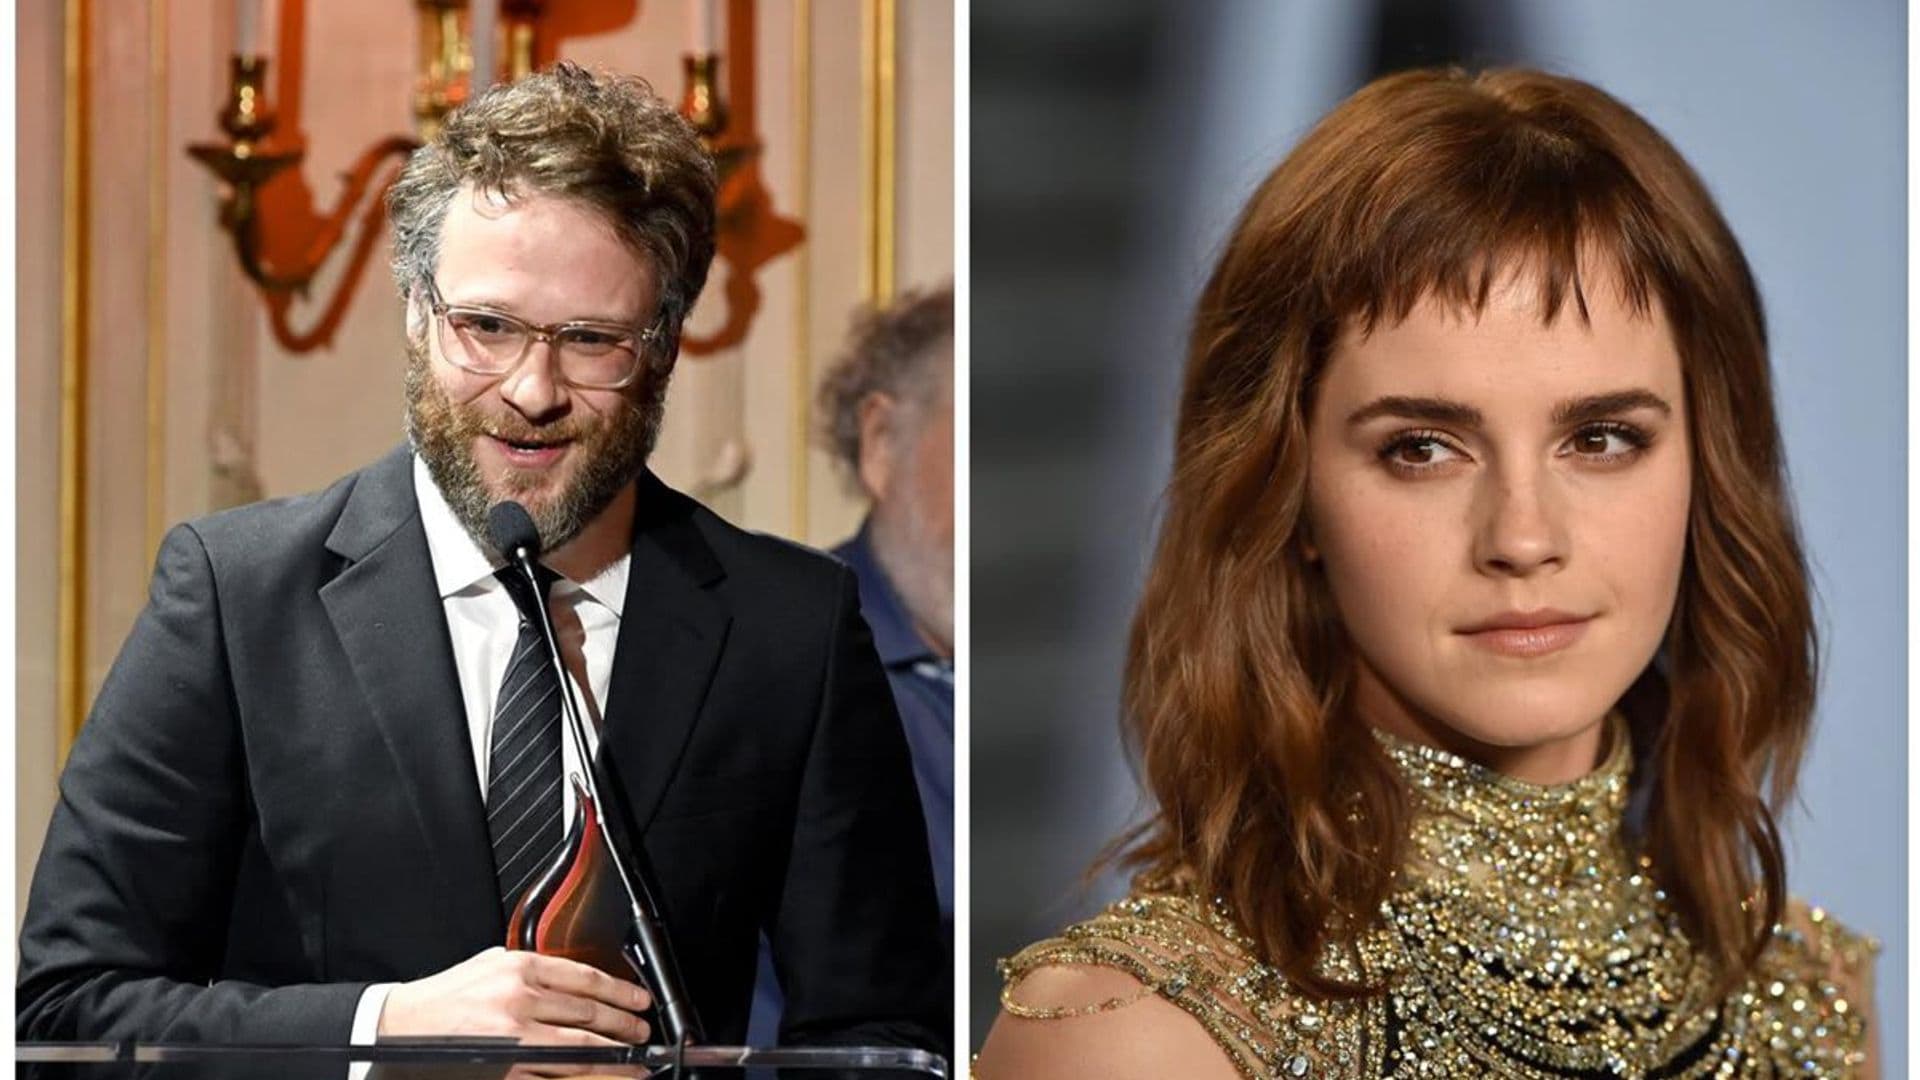 Seth Rogen took to Twitter to clarify what happened in 2013 with Emma Watson and his movie